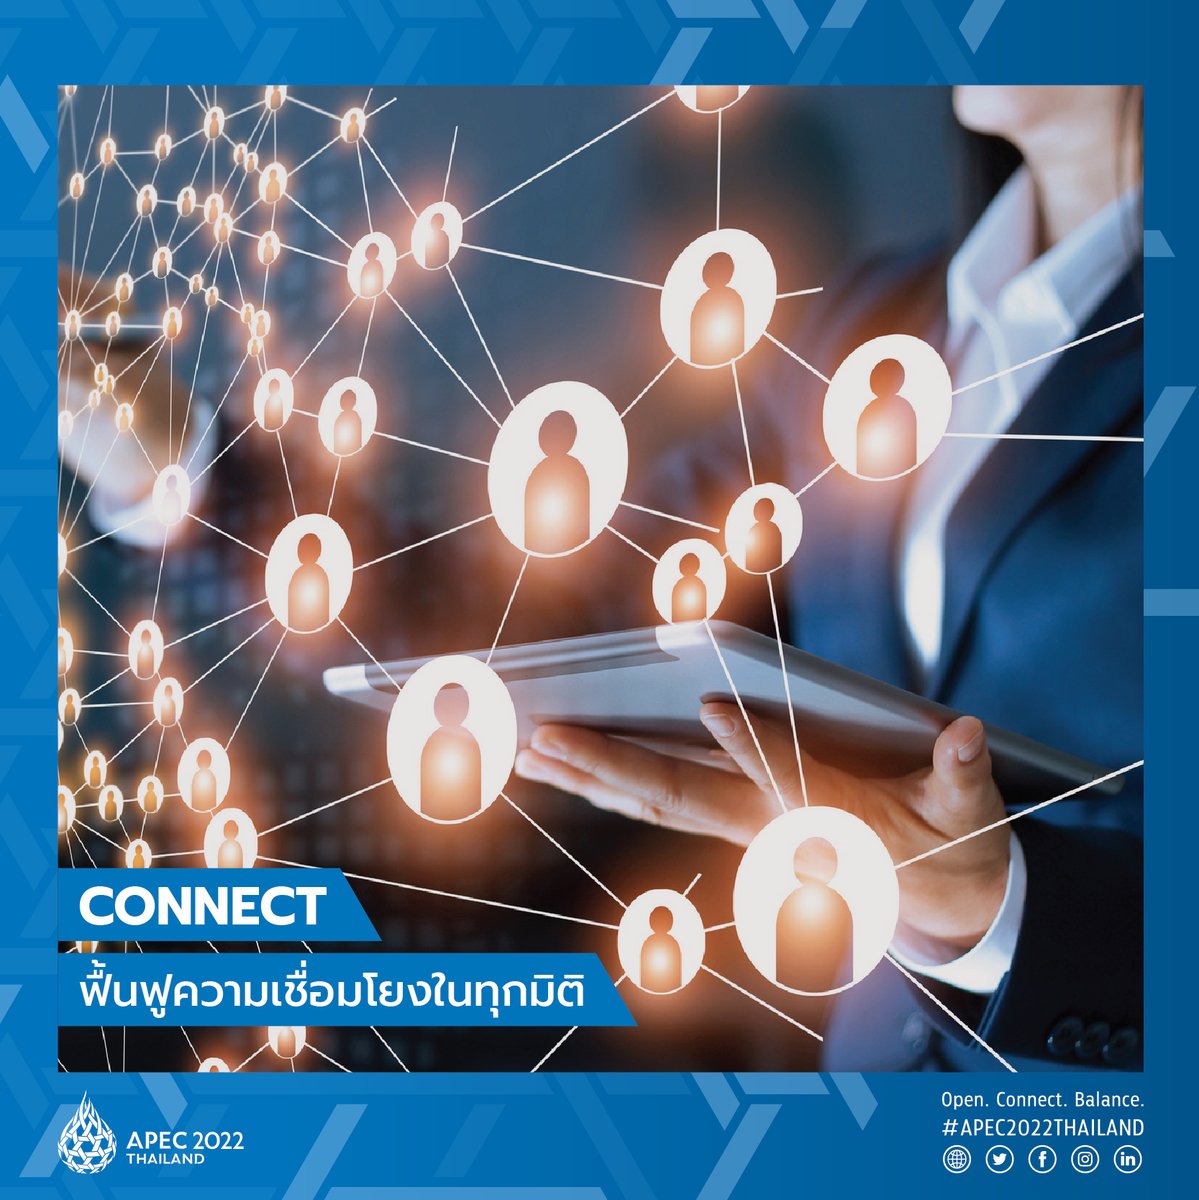 Connect in all dimensions. 2022 is the time to restore regional economic connectivity which is the core of APEC, that includes facilitating logistics and tourism as well as trade, investment, e-commerce, and customs.